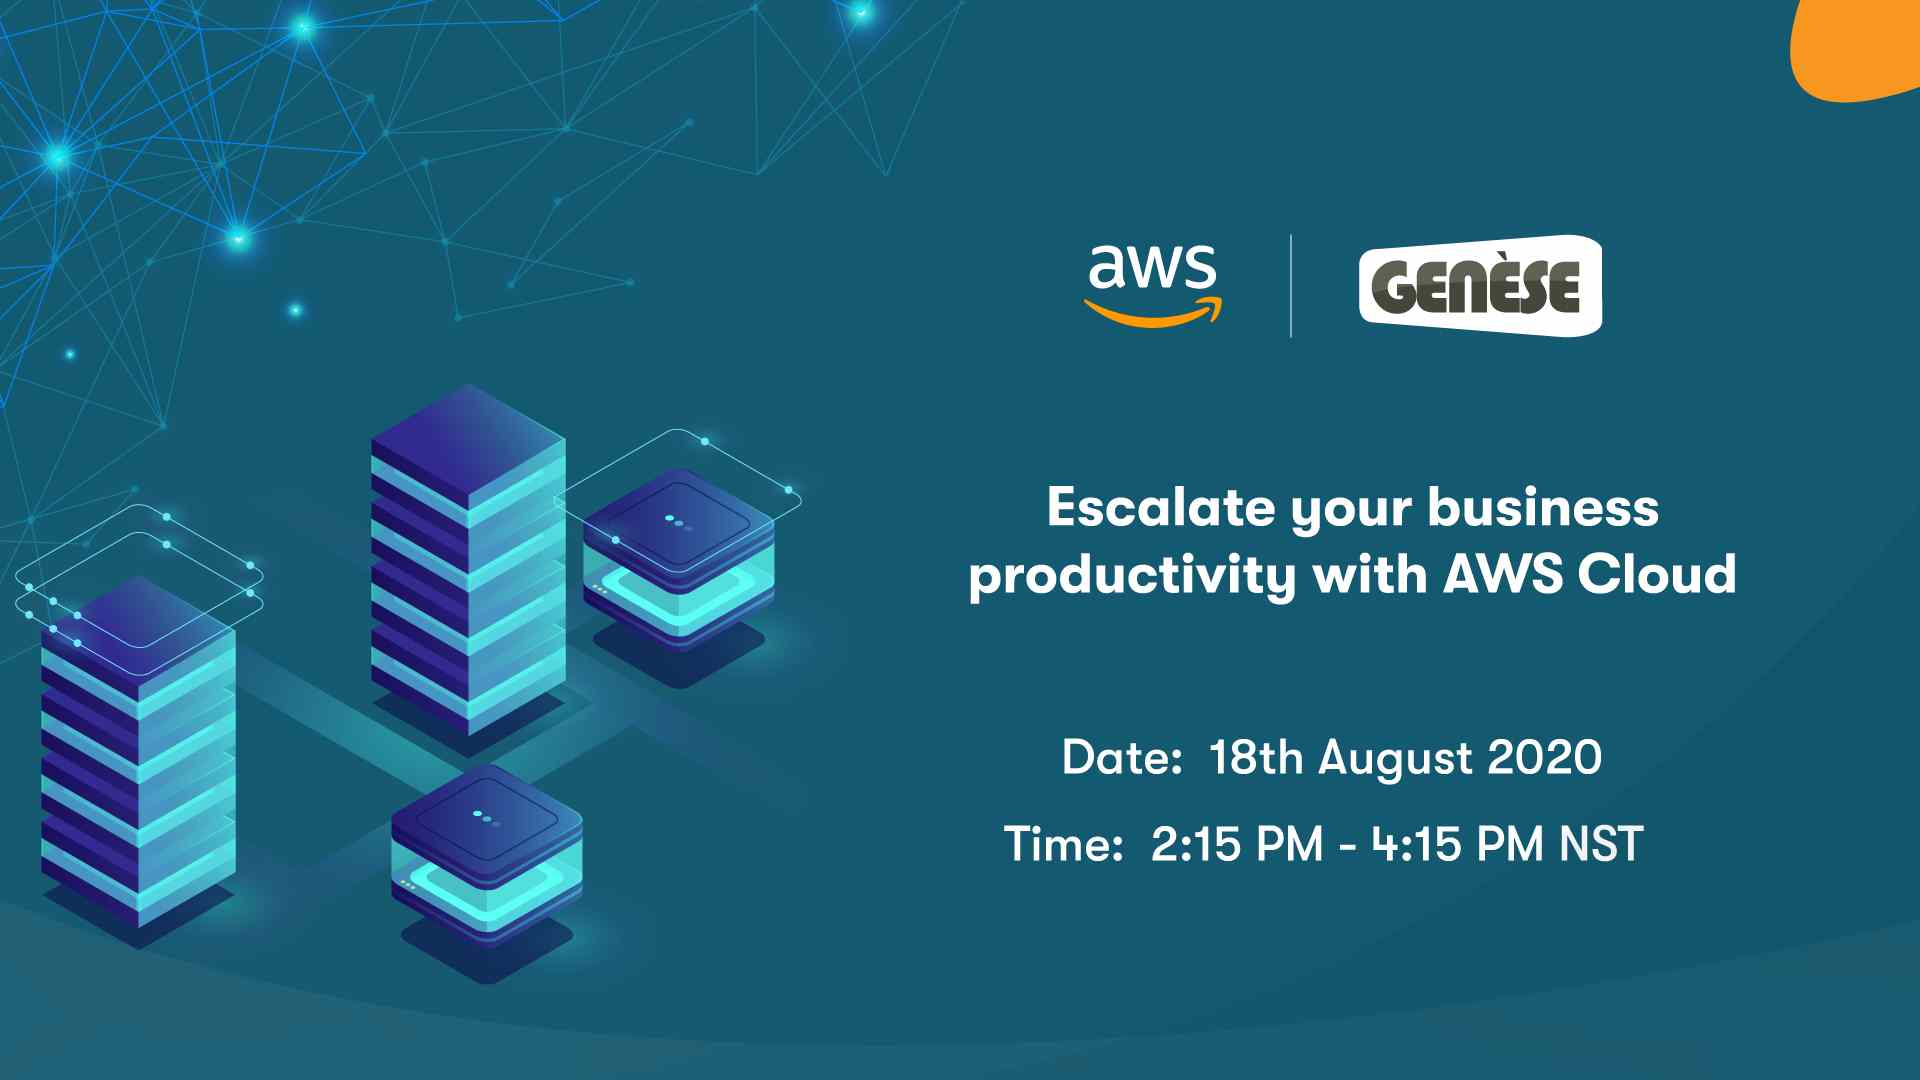 Escalate your business productivity with AWS Cloud